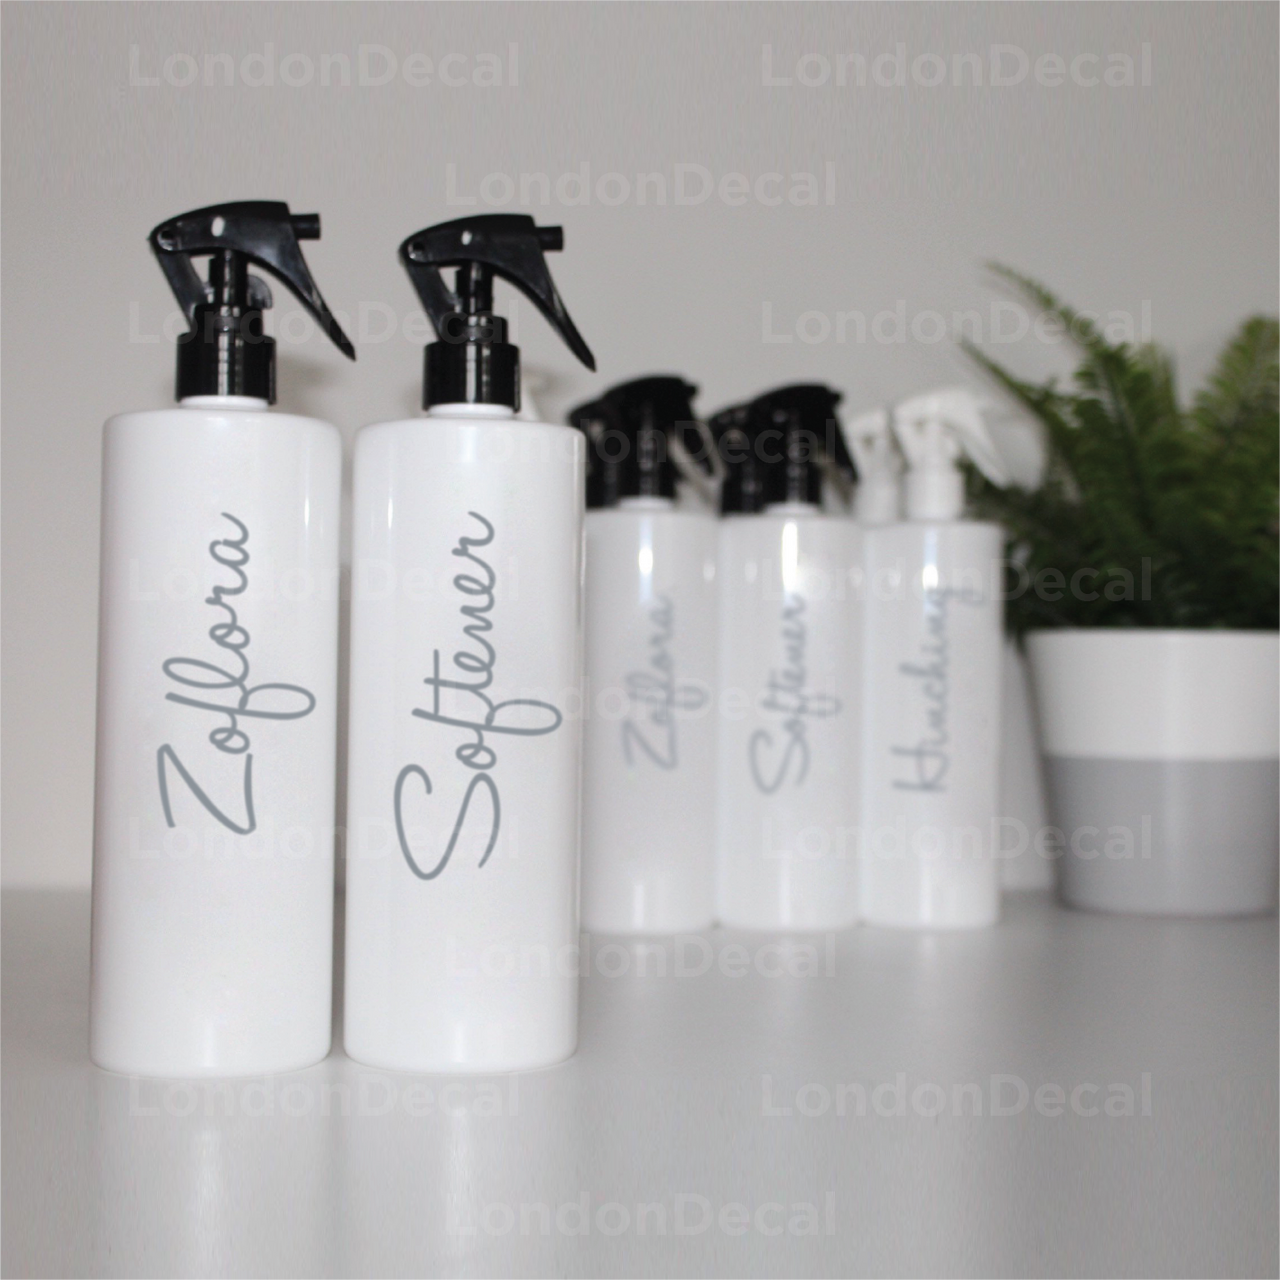 ZOFLORA AND SOFTENER - Mrs Hinch inspired spray bottle decals